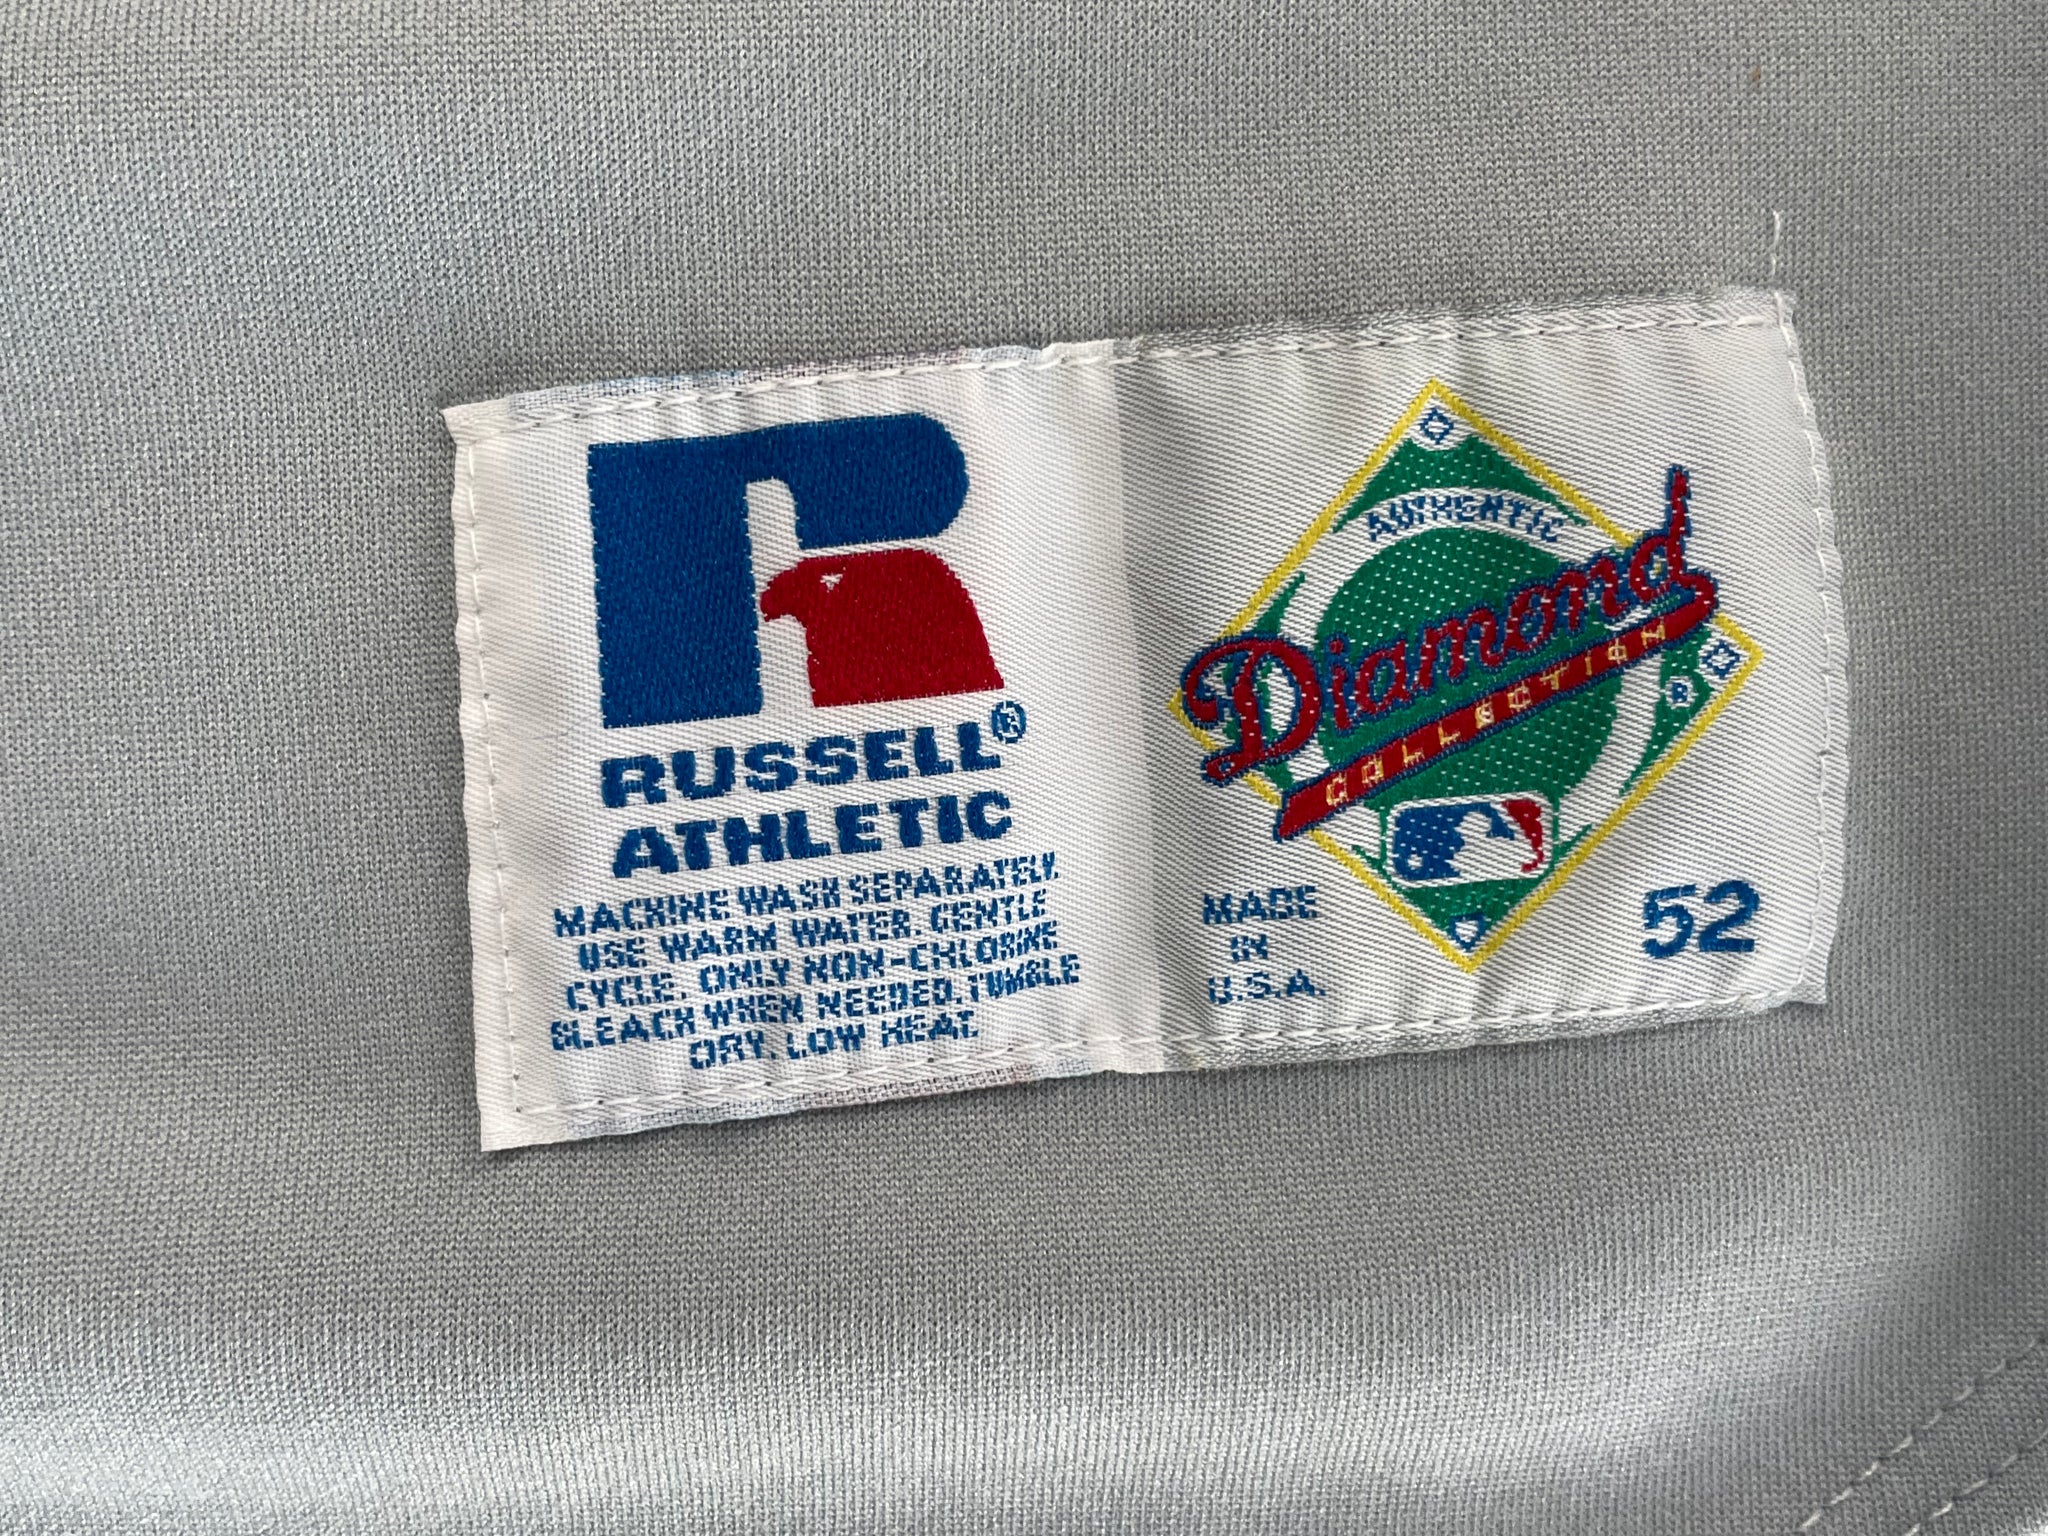 CHICAGO WHITE SOX VINTAGE 1990'S RUSSELL ATHLETIC DIAMOND